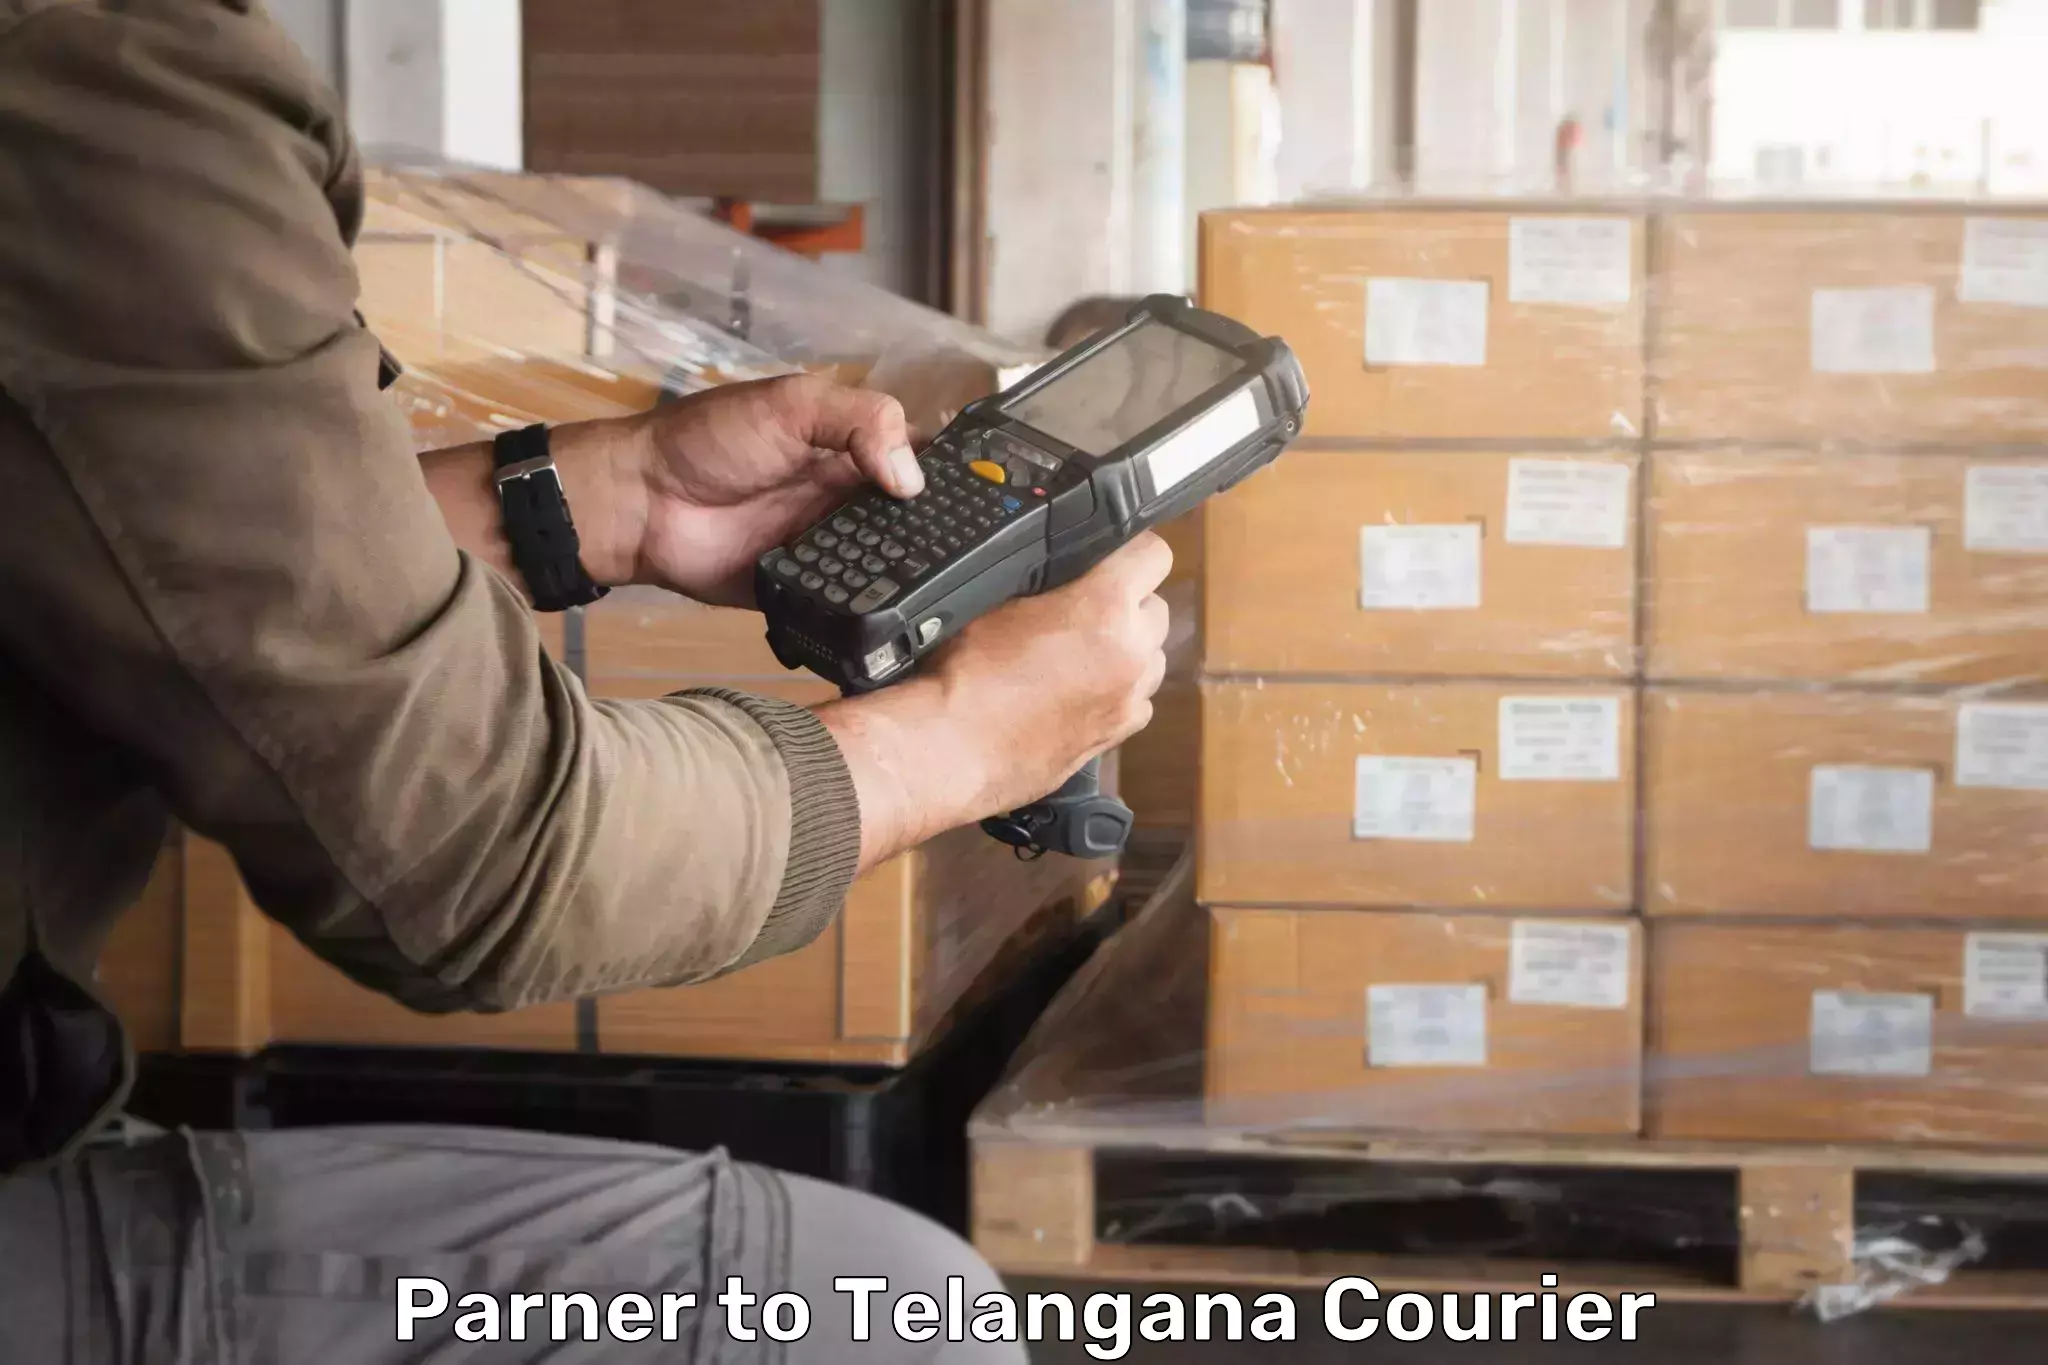 International courier networks Parner to Telangana